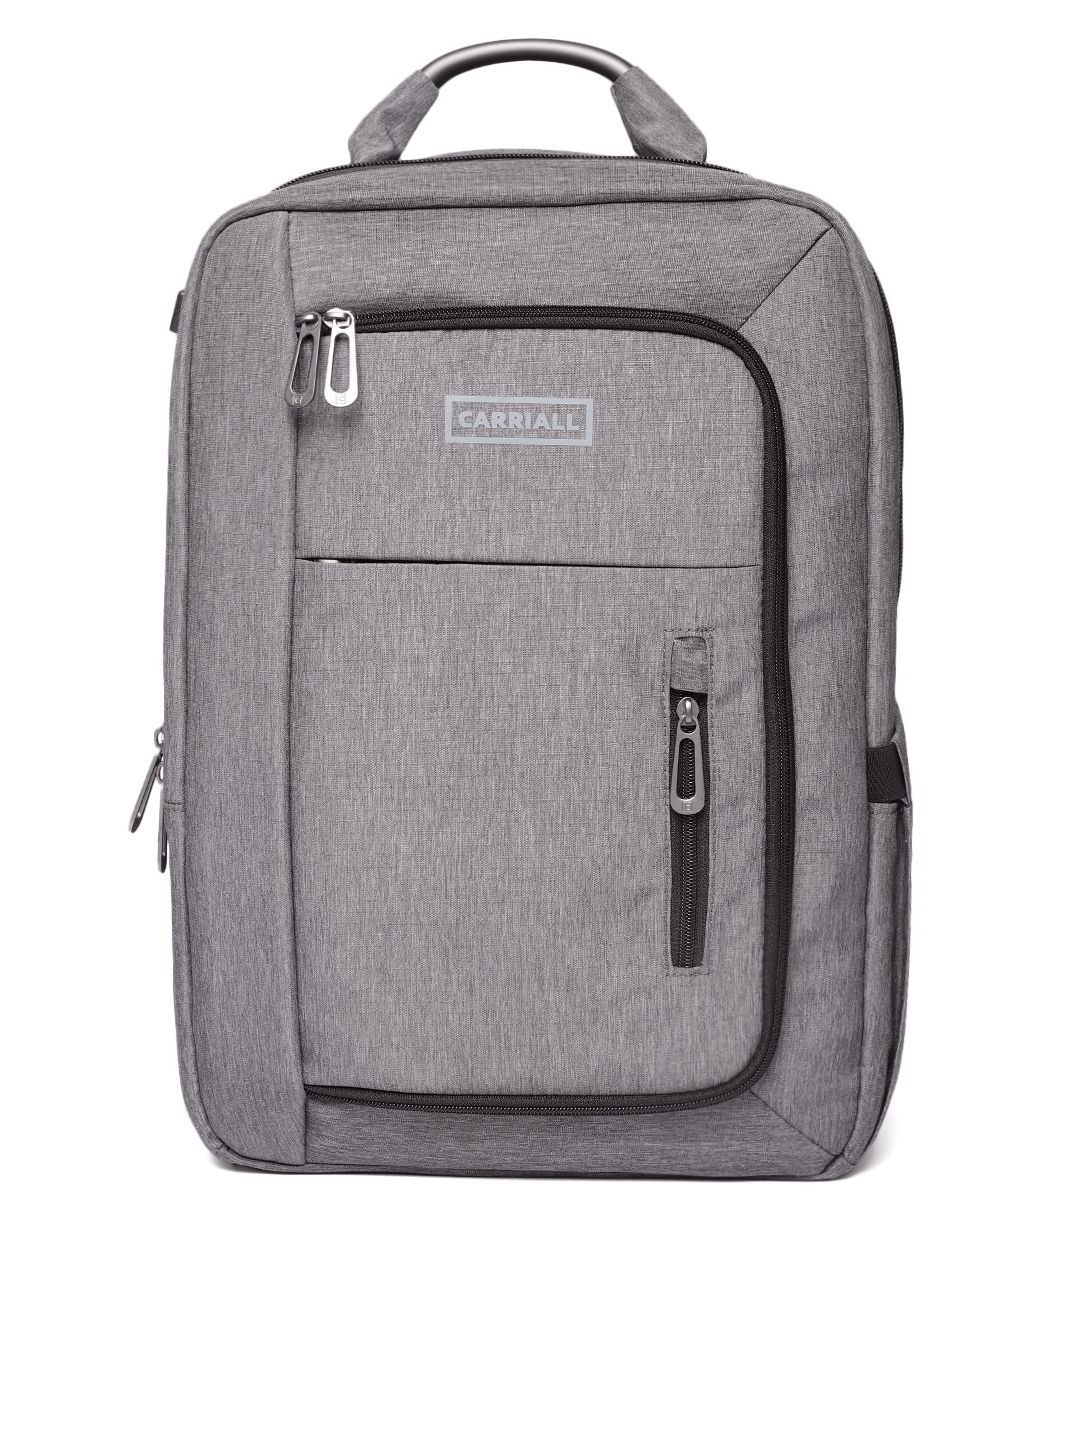 CARRIALL Unisex Grey Solid Minch Laptop Backpack Price in India